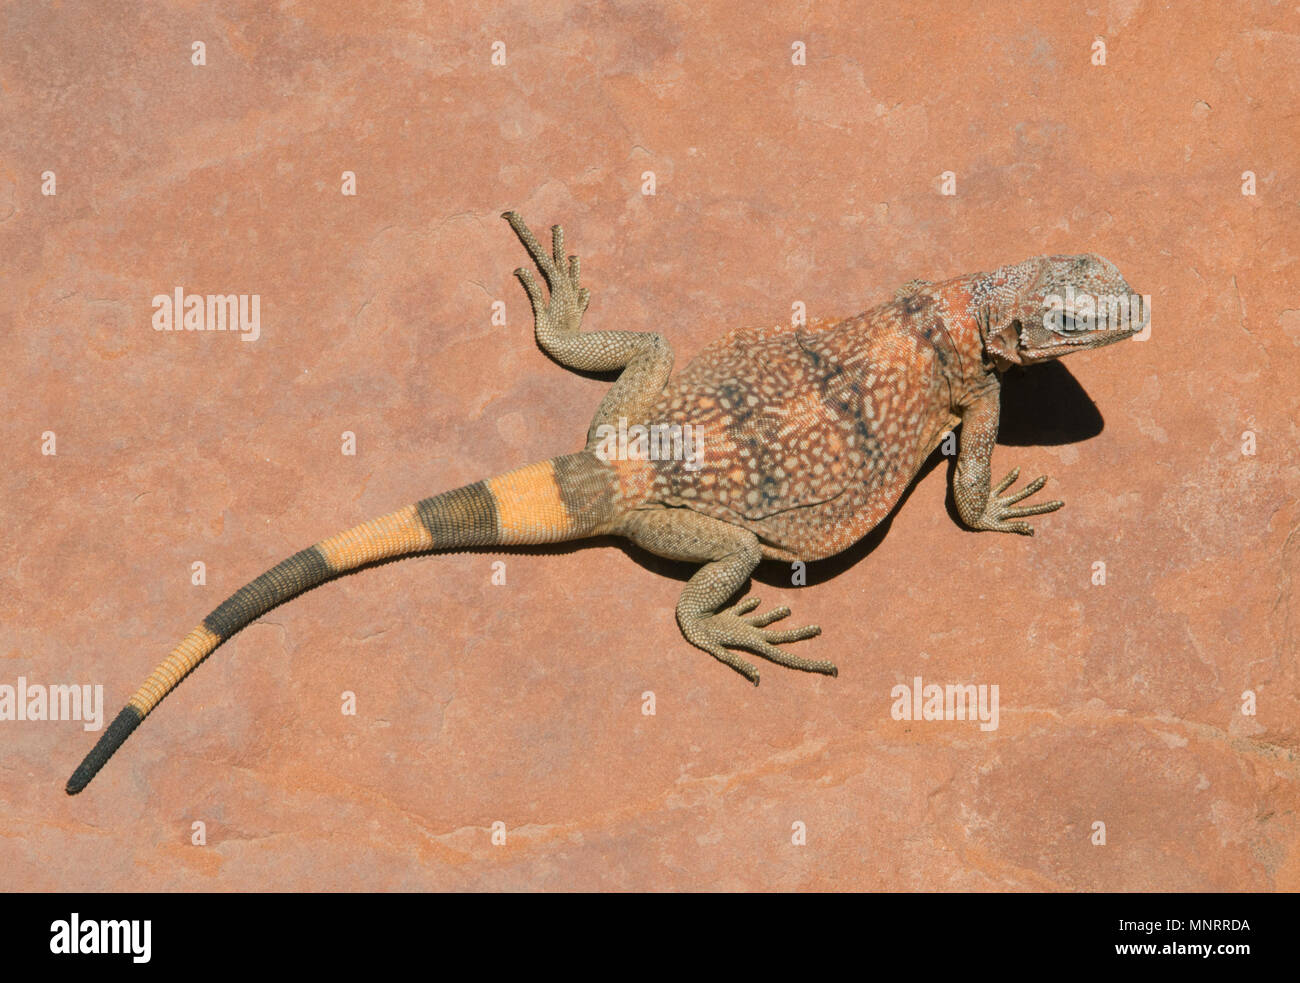 Common Chuckwalla (Sauromalus ater) on sandstone, Valley of Fire State Park, Nevada Stock Photo